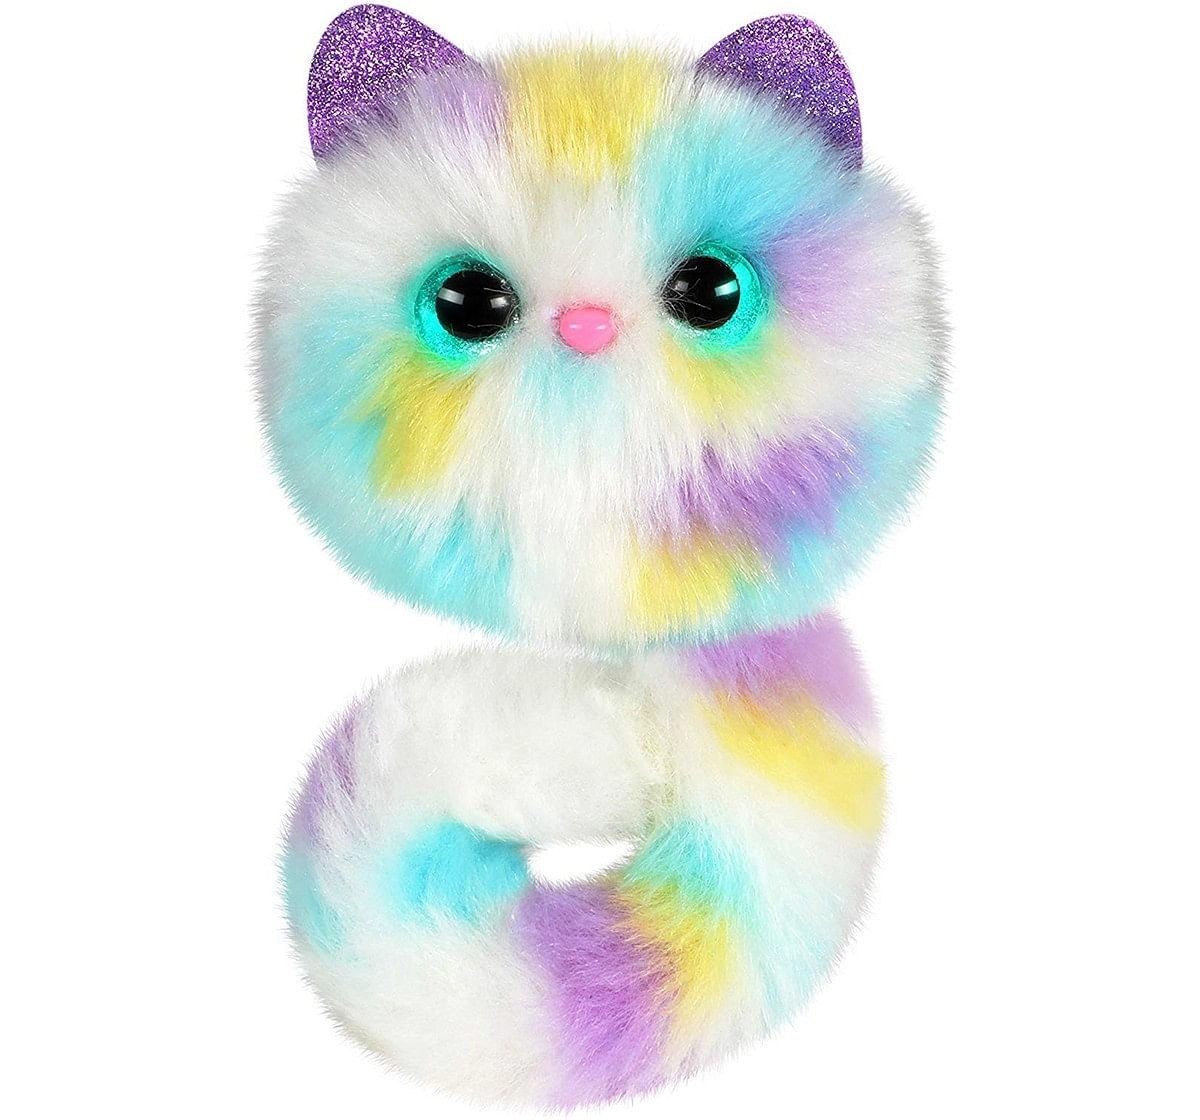 Pomsies Funfetti Interactive Soft Toys for Kids age 3Y+ - 35 Cm 